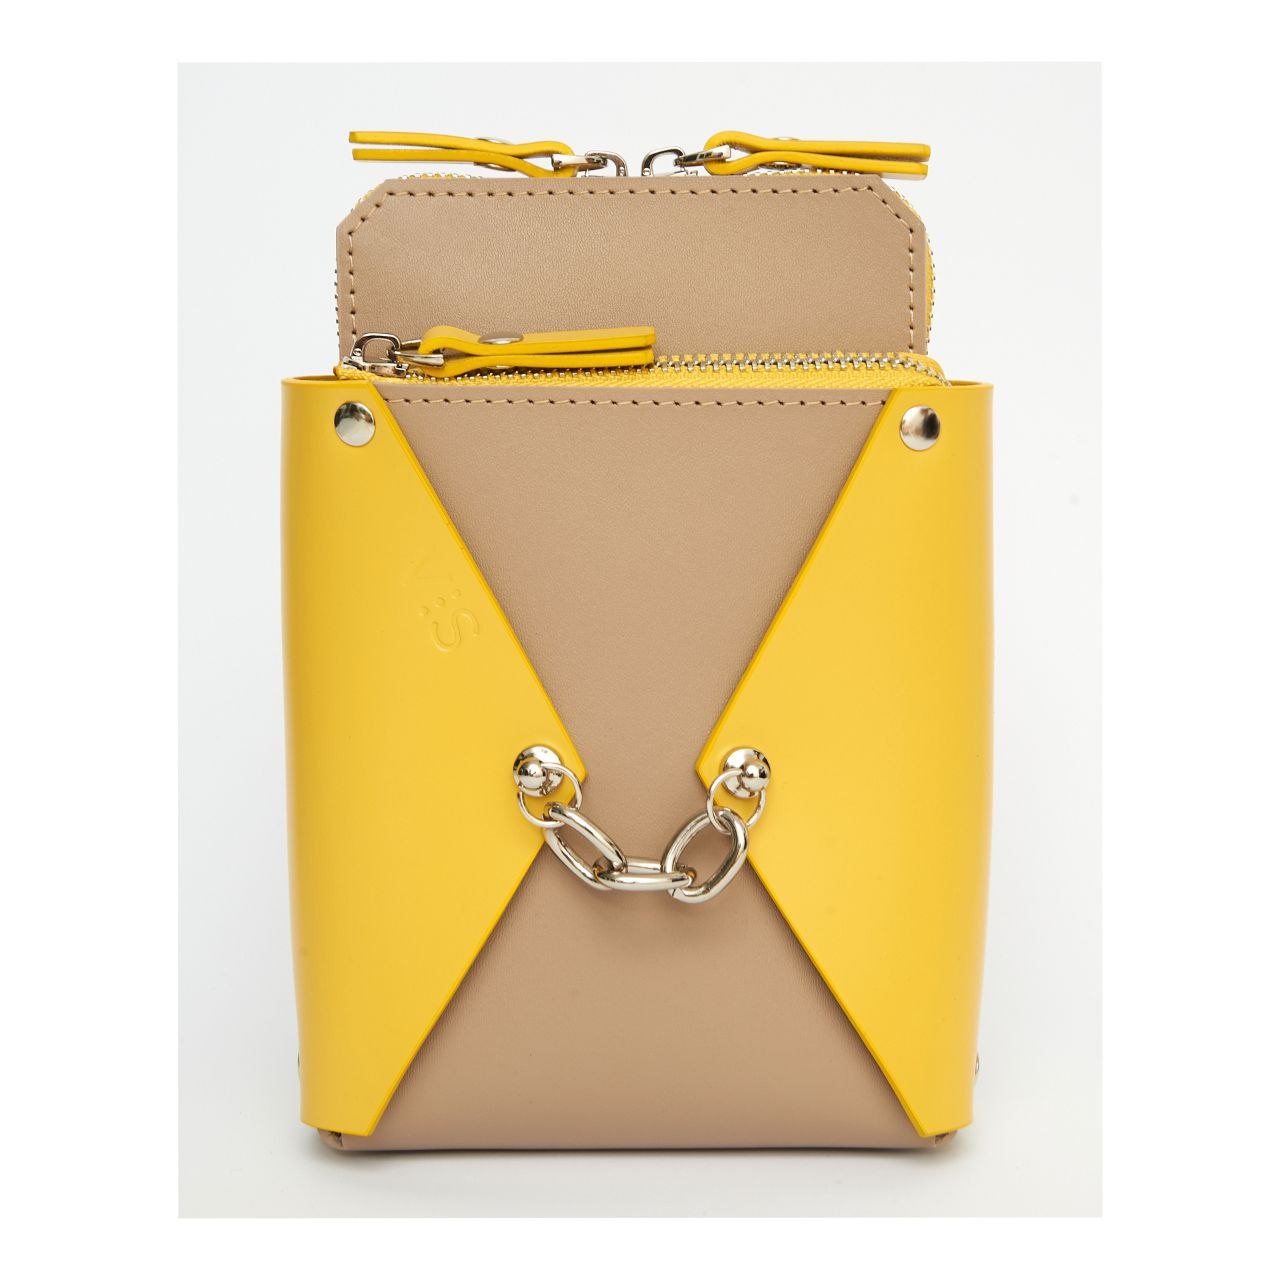 Talia leather bag in beige yellow color